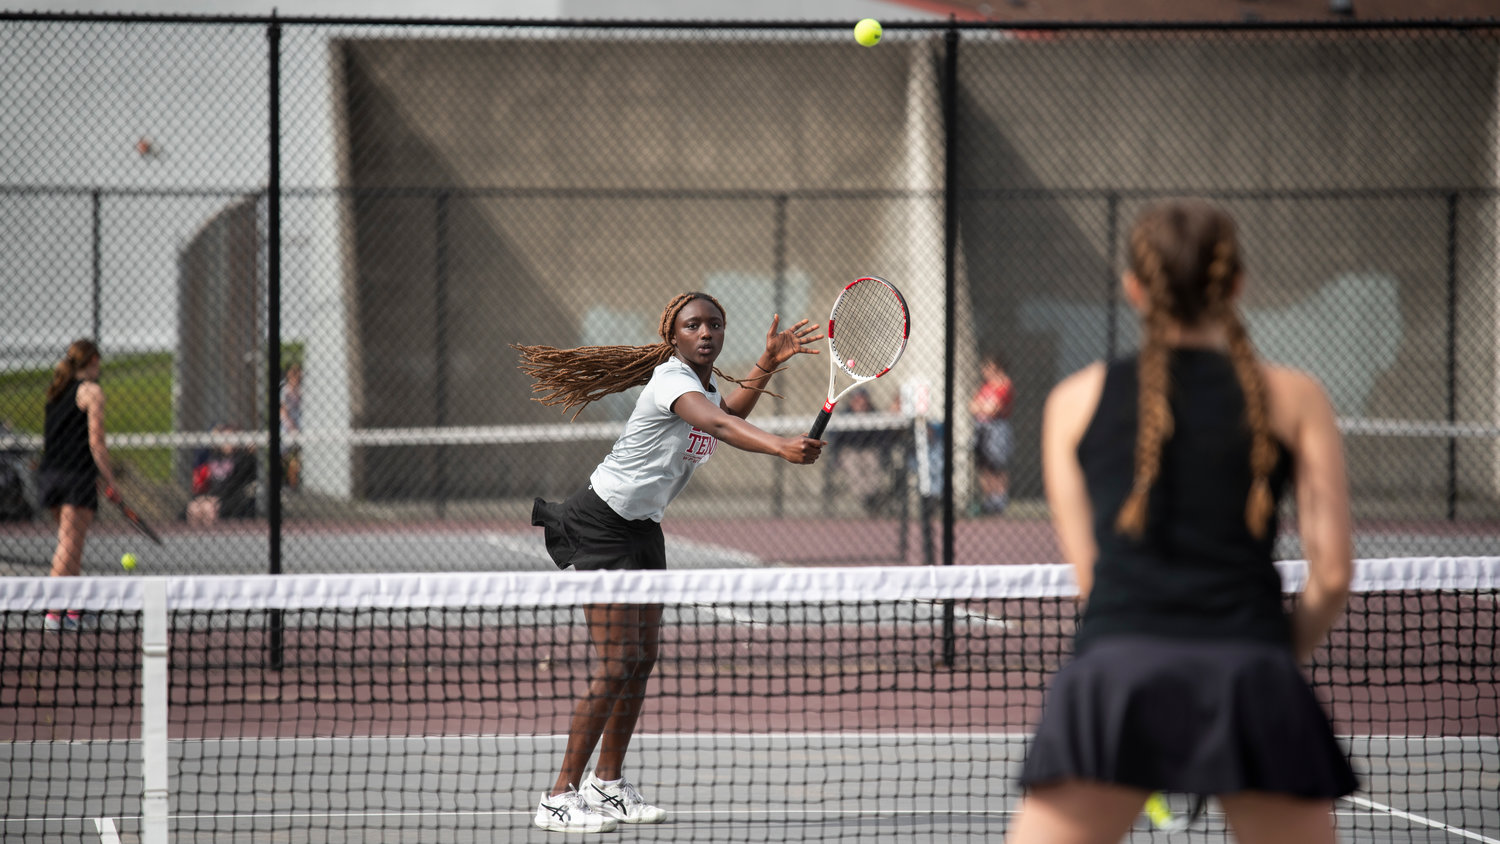 Mariama Ceesay, first doubles player for W.F. West, hits a backhand volley against Centralia’s Maddie Corwin at W.F. West on Friday.